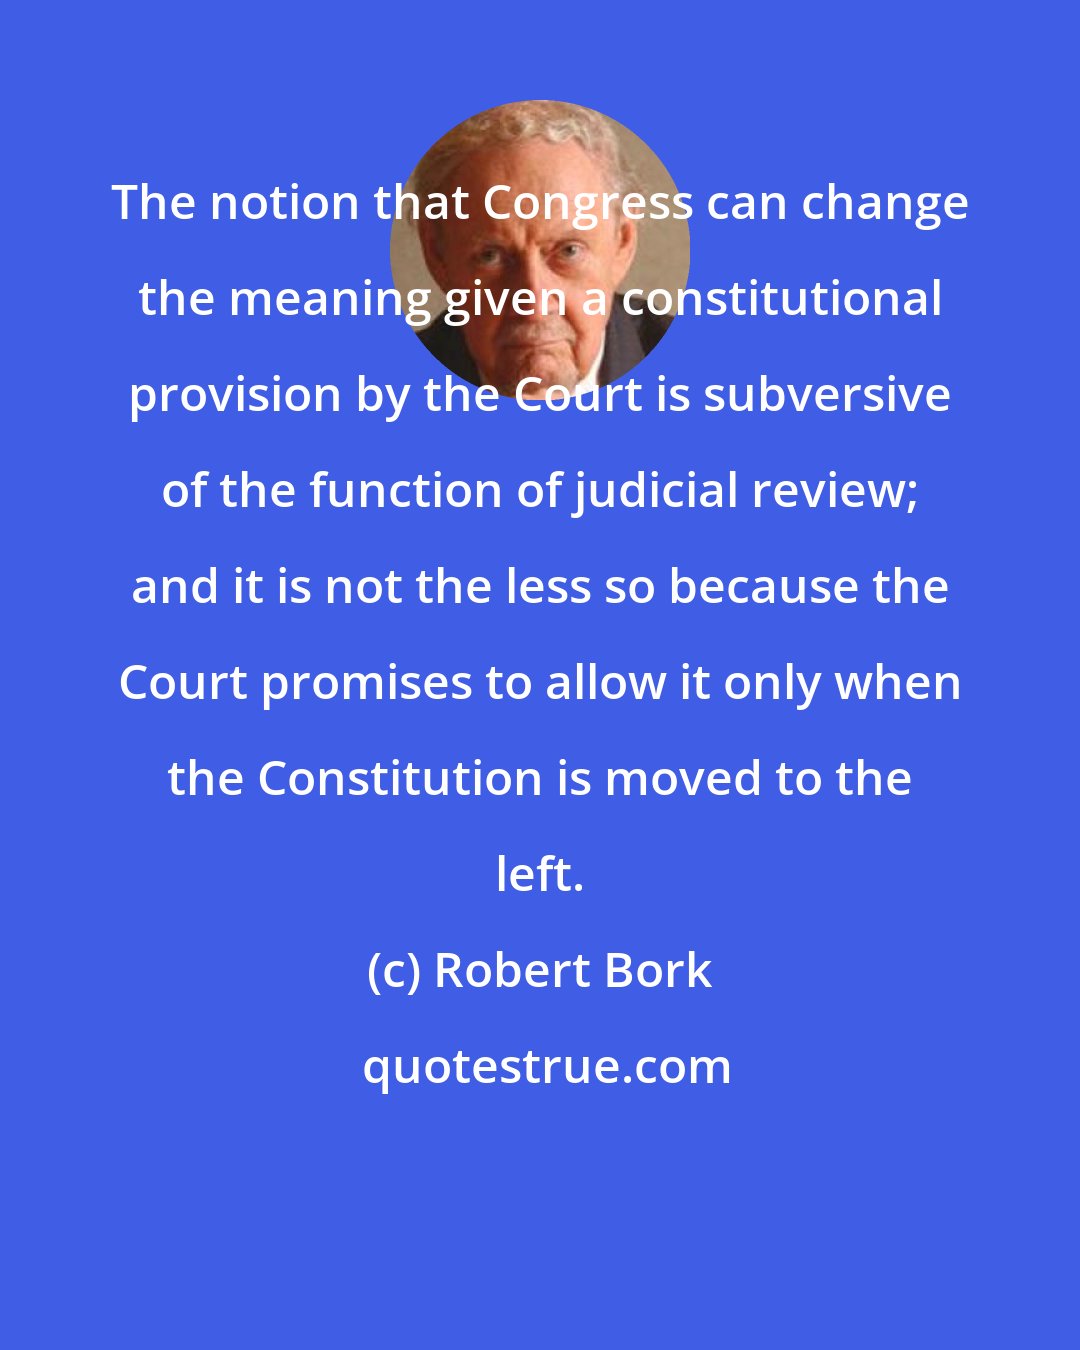 Robert Bork: The notion that Congress can change the meaning given a constitutional provision by the Court is subversive of the function of judicial review; and it is not the less so because the Court promises to allow it only when the Constitution is moved to the left.